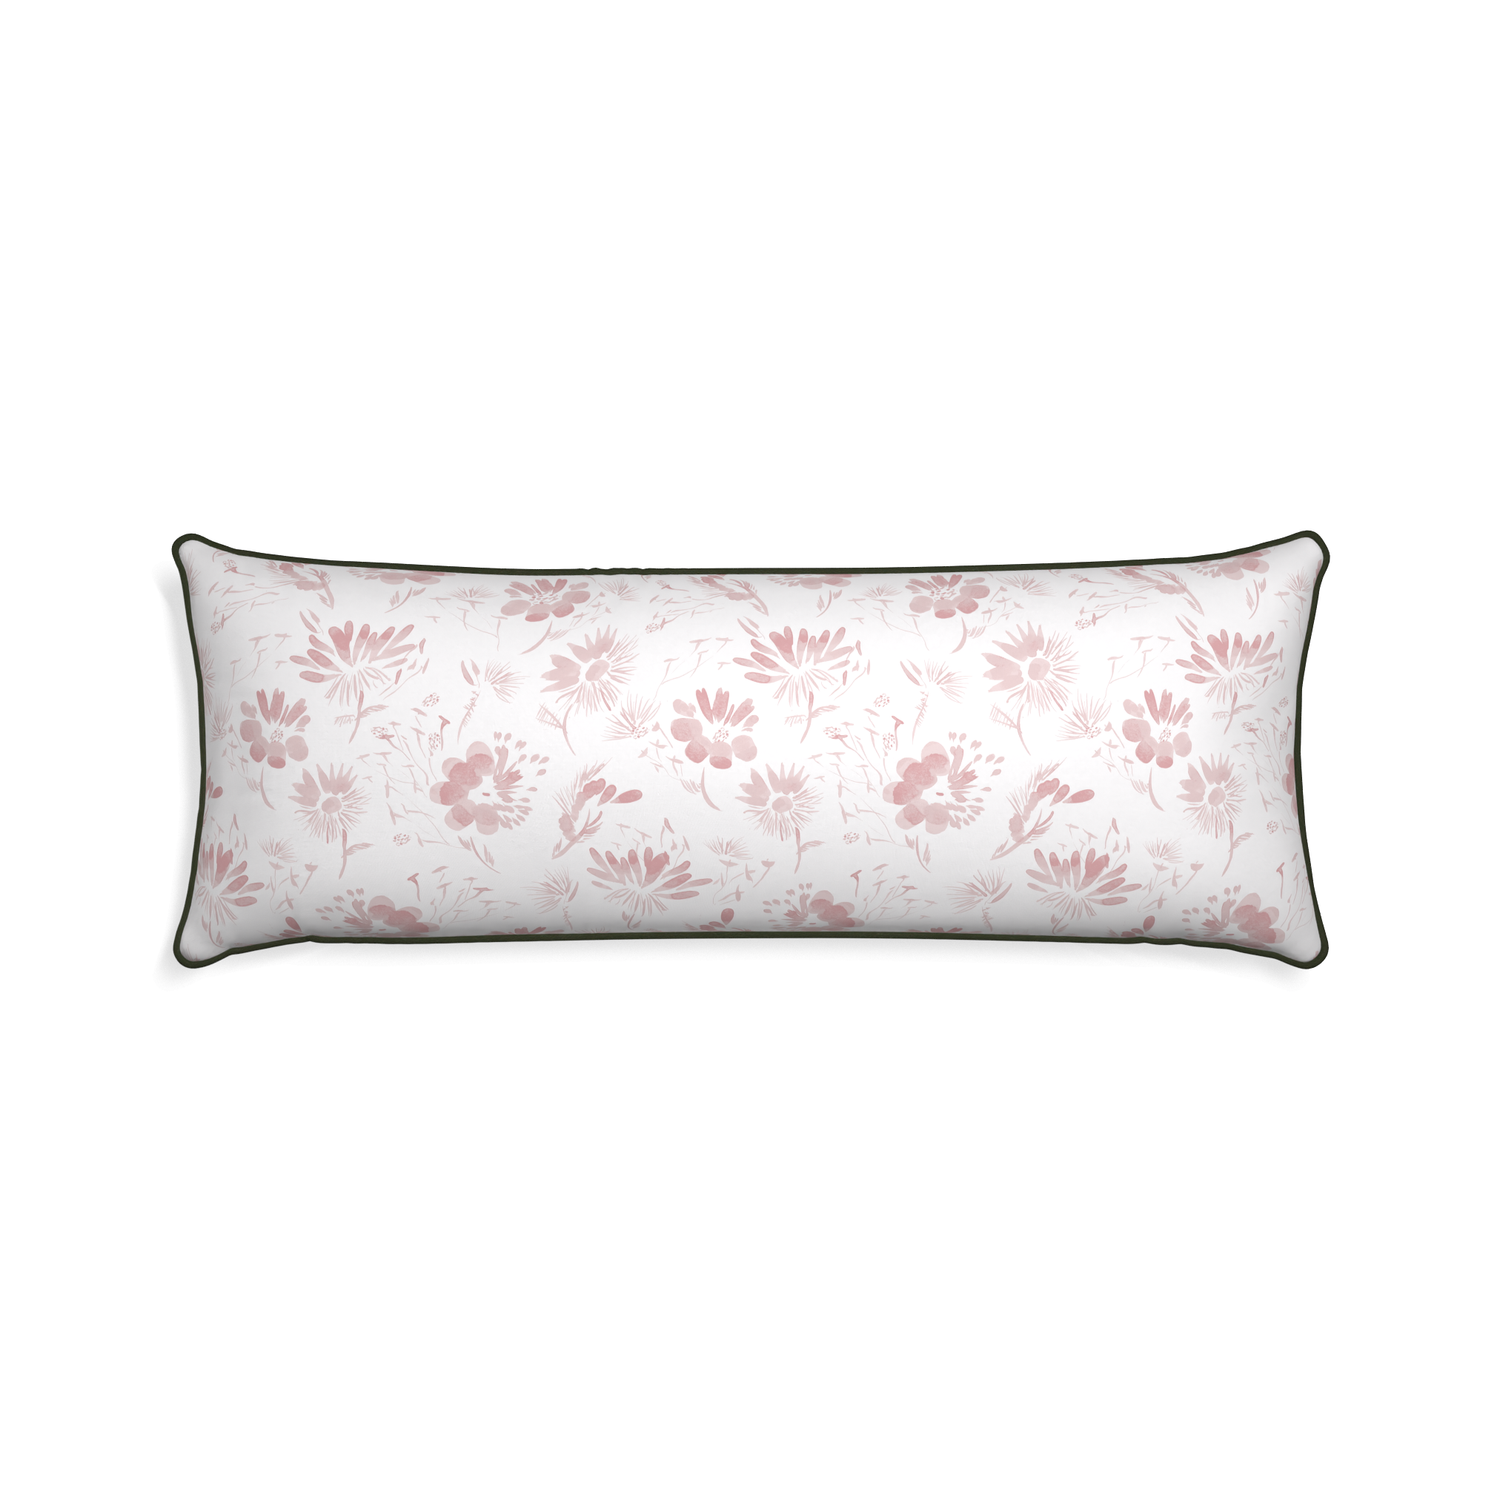 Xl-lumbar blake custom pink floralpillow with f piping on white background